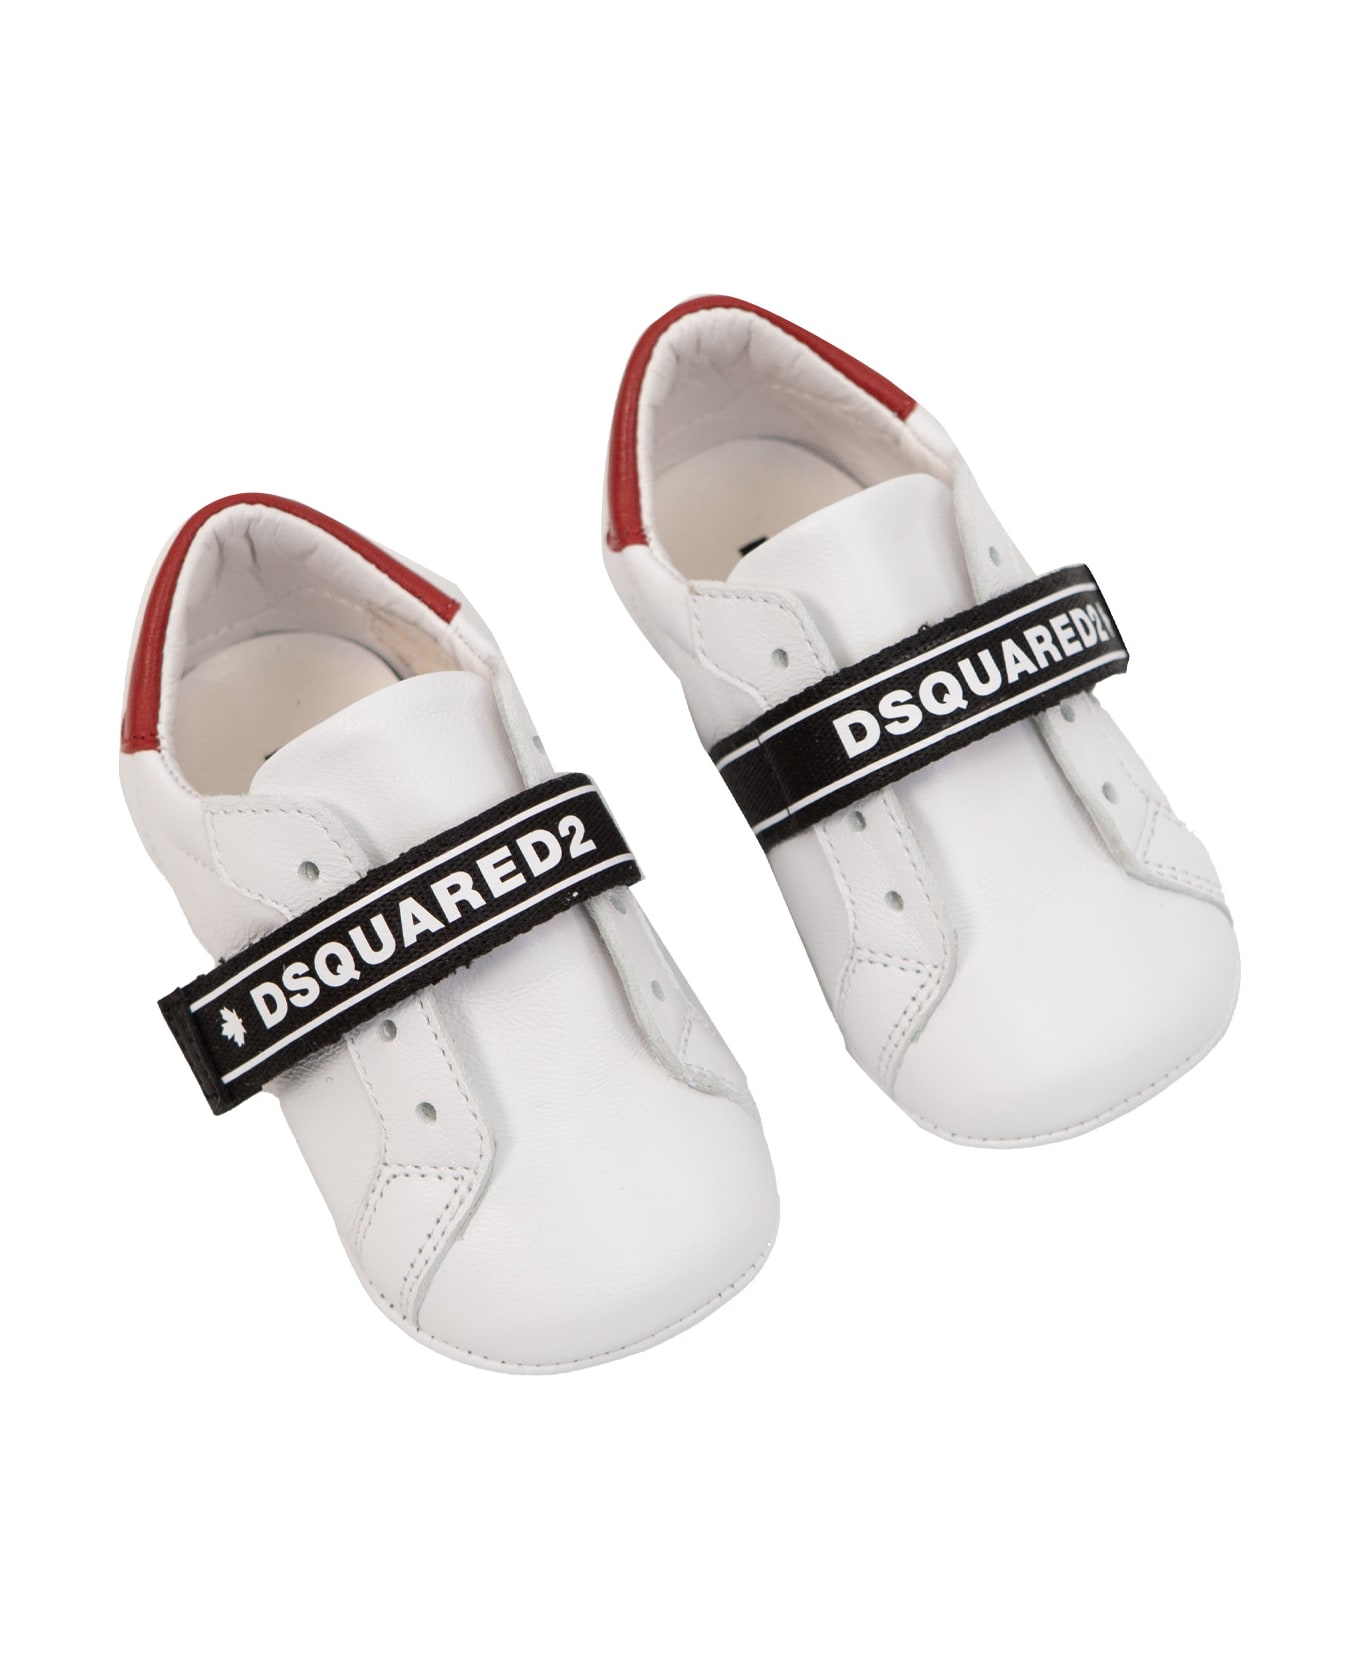 Dsquared2 First Steps Shoes Leisure - White